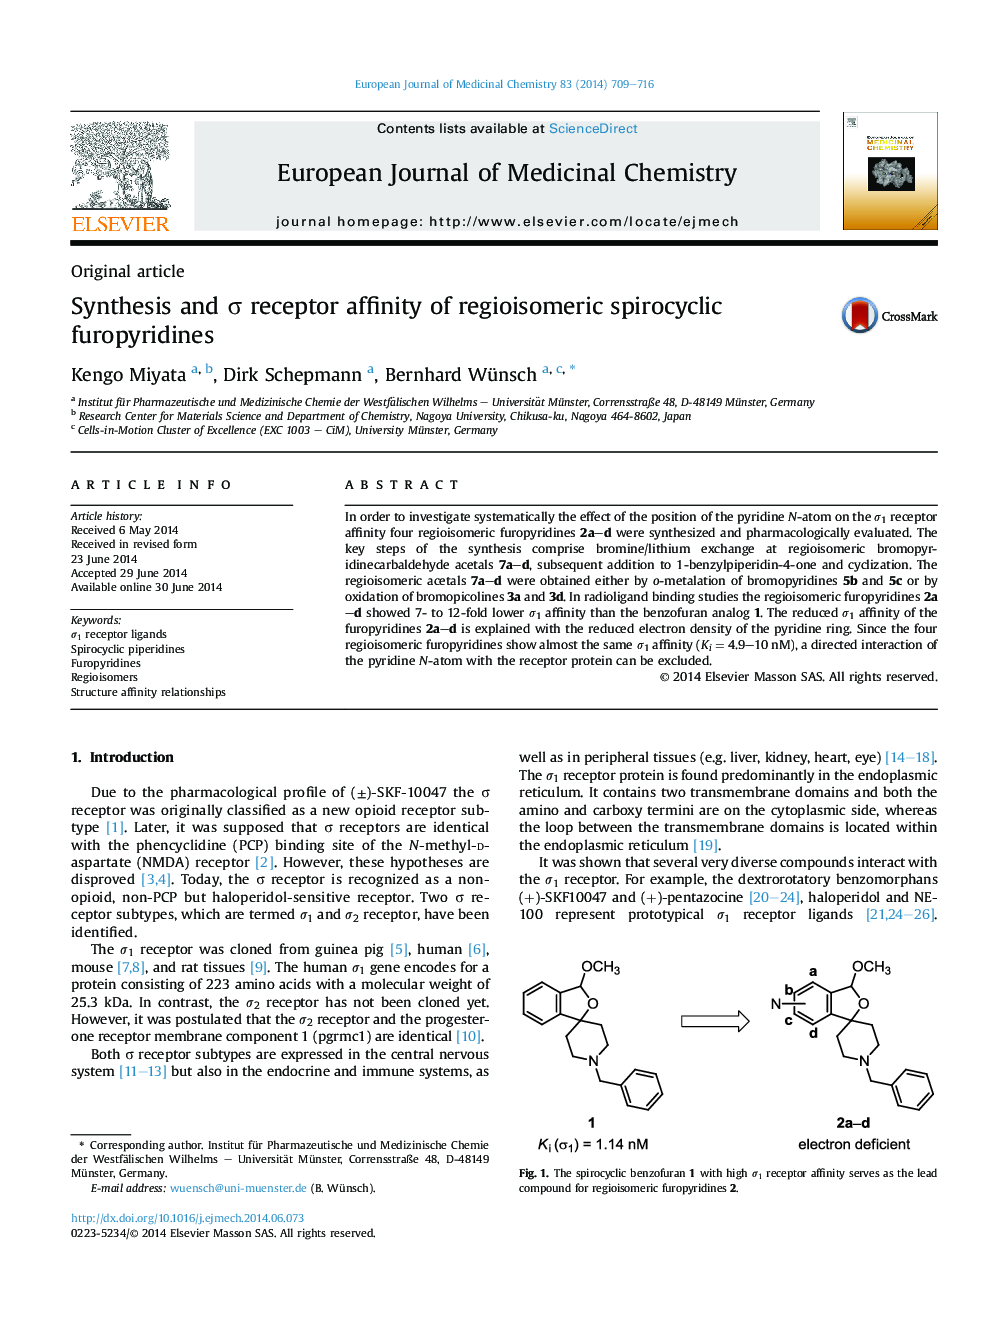 Synthesis and σ receptor affinity of regioisomeric spirocyclic furopyridines